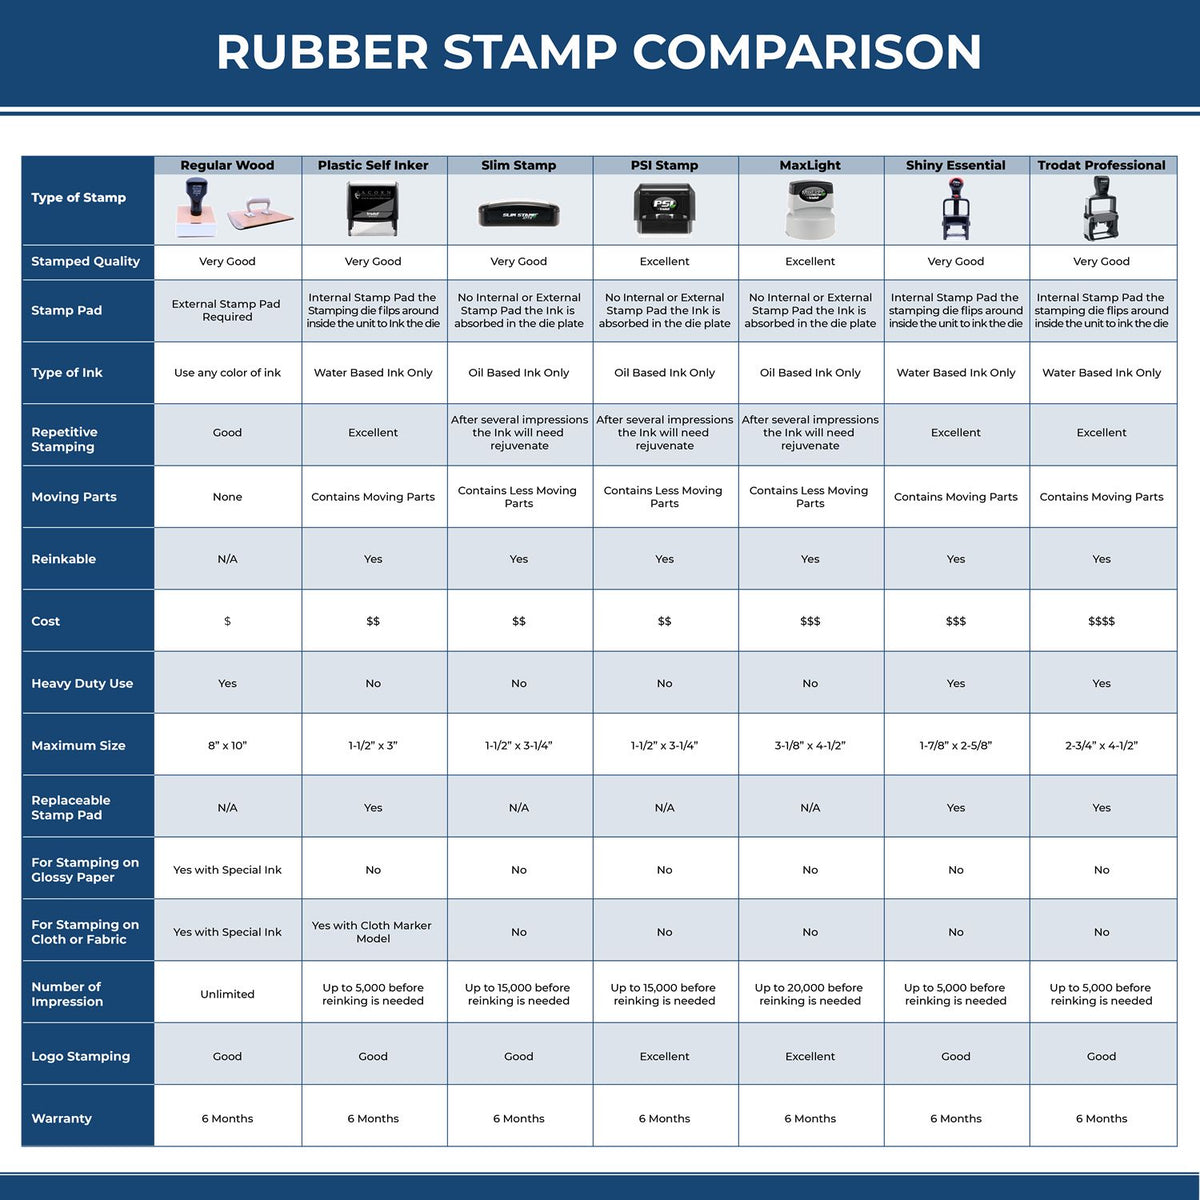 Large Self-Inking Received Unsealed Stamp 4960S Rubber Stamp Comparison